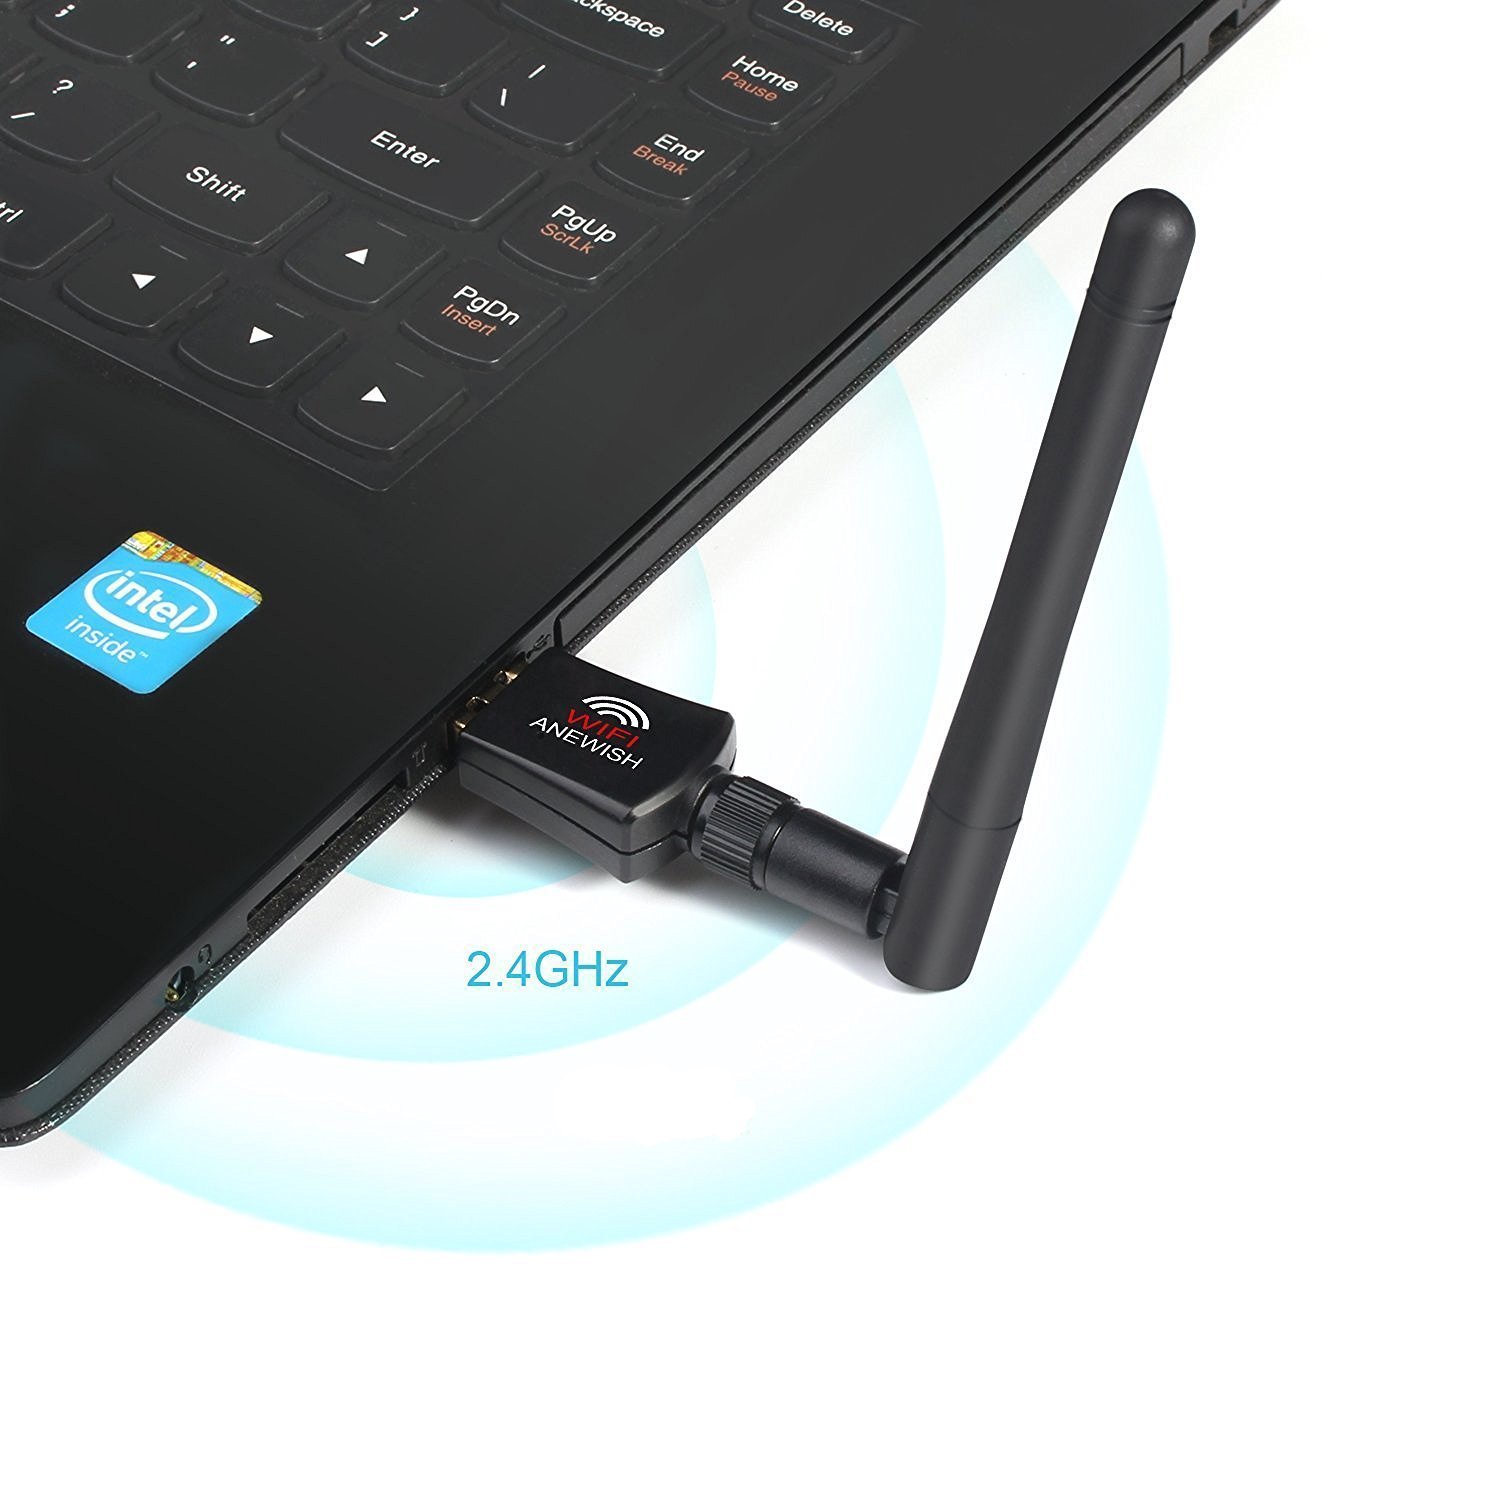 Anewish 300mbps usb WiFi adapter for $8